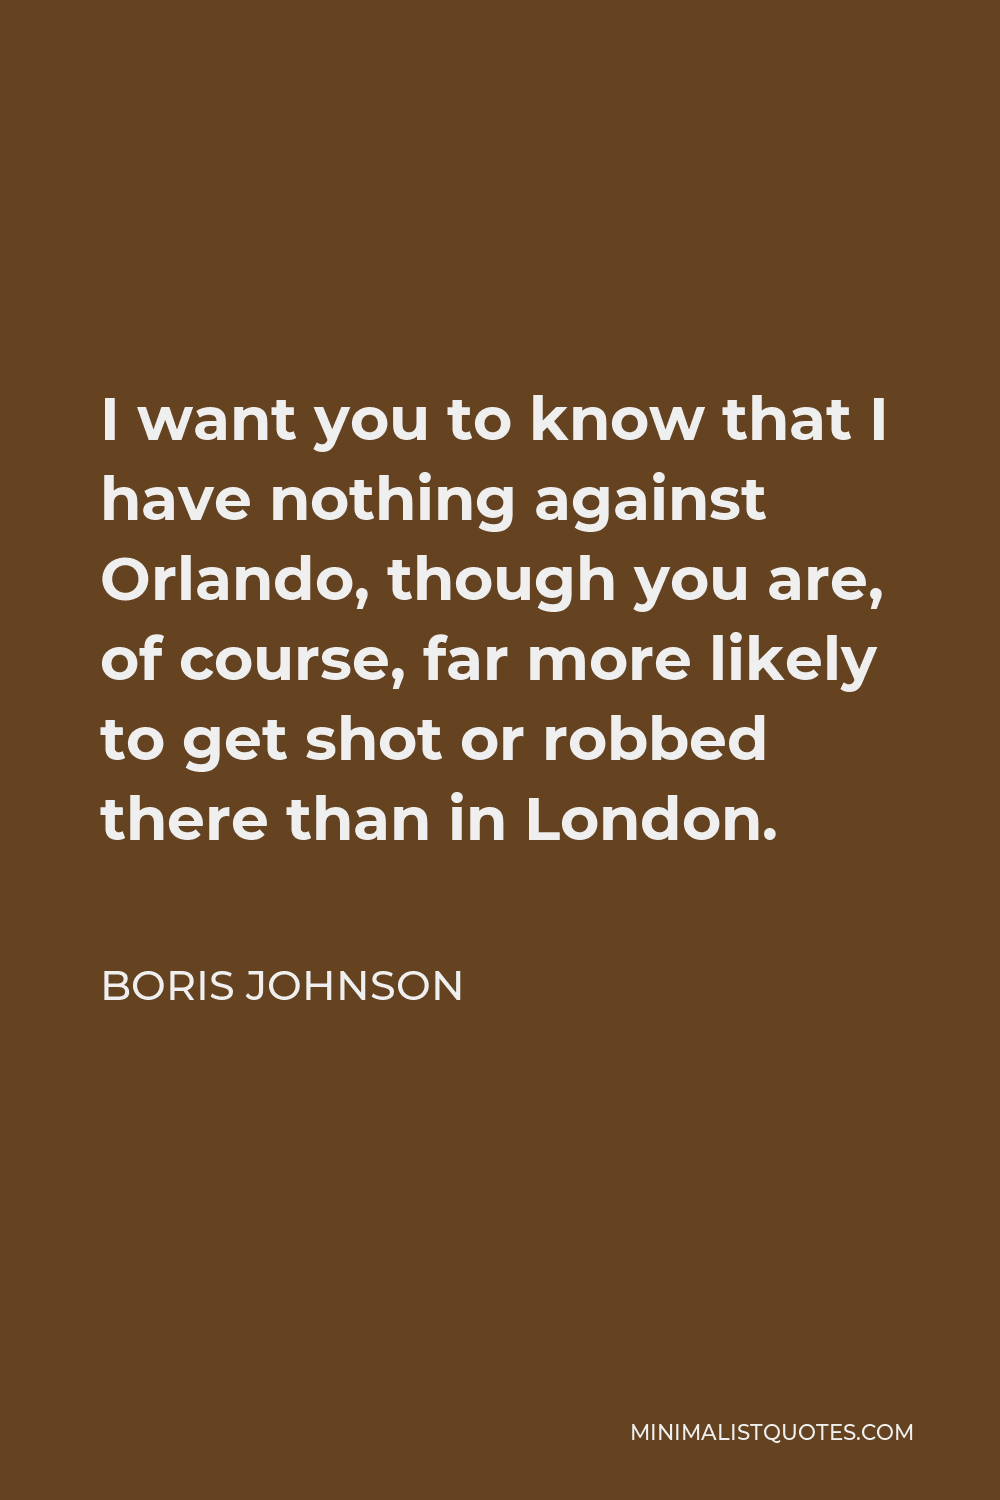 Boris Johnson Quote - I want you to know that I have nothing against Orlando, though you are, of course, far more likely to get shot or robbed there than in London.